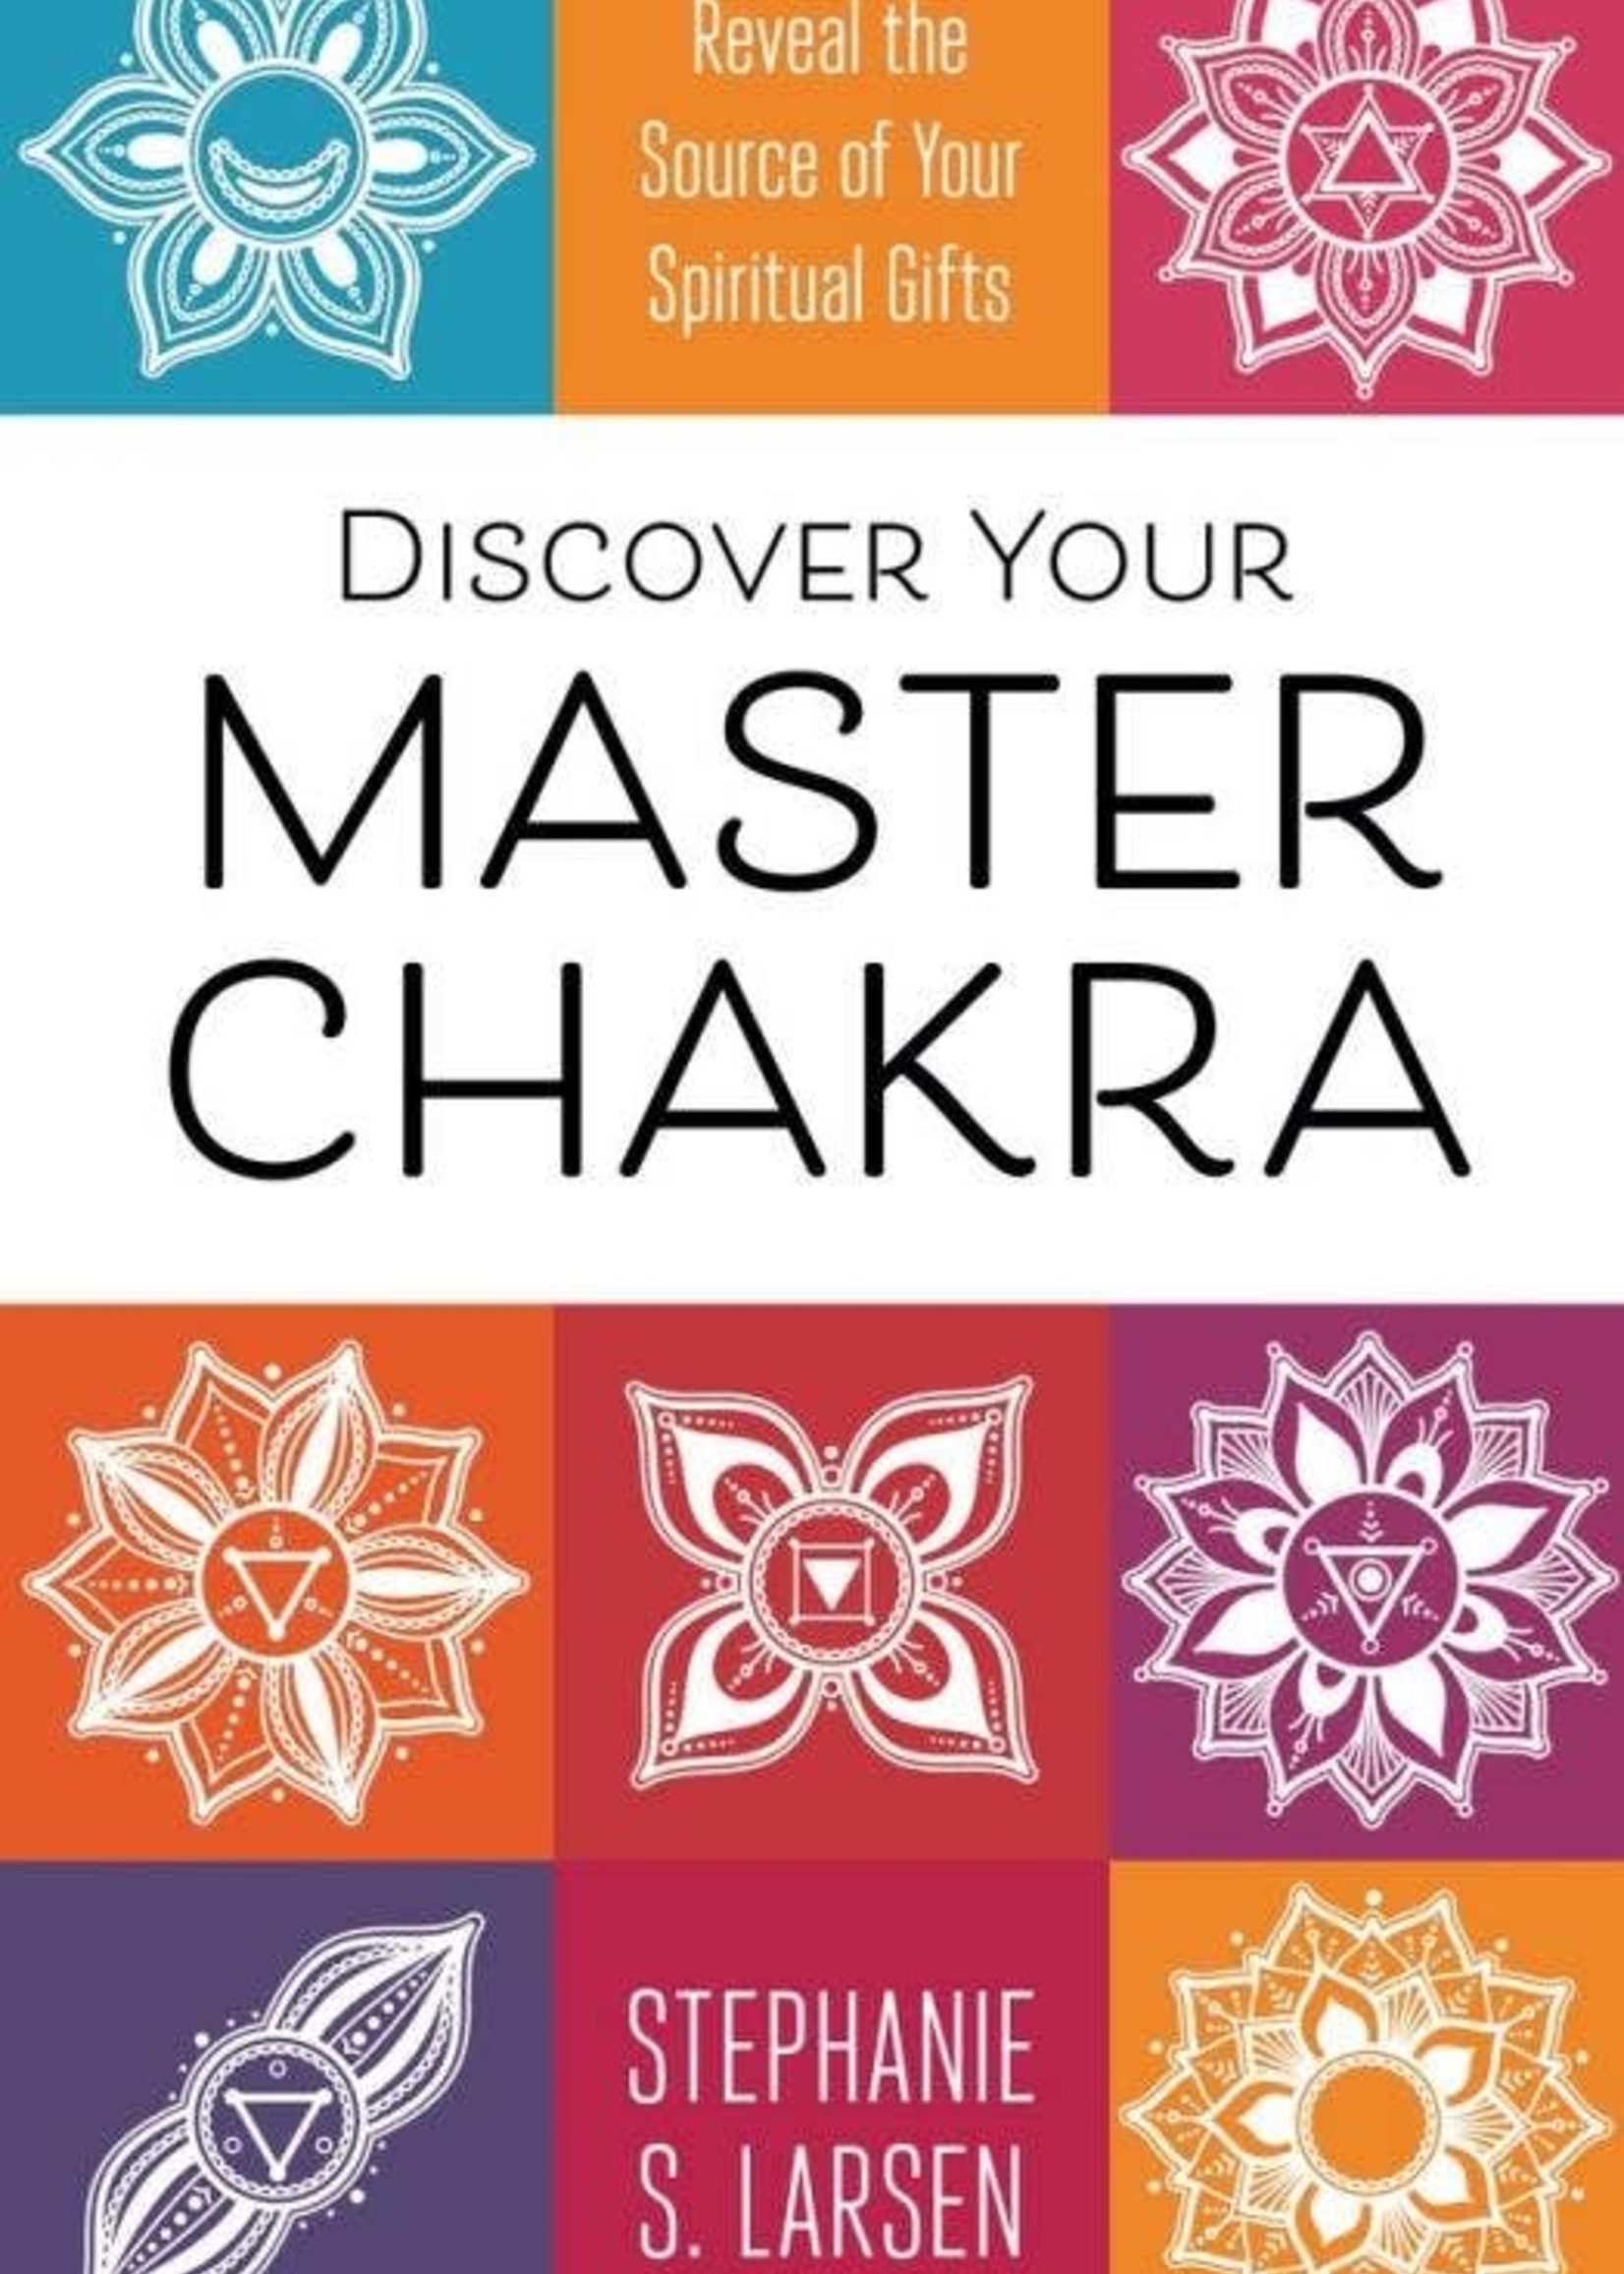 Discover Your Master Chakra: Reveal the Source